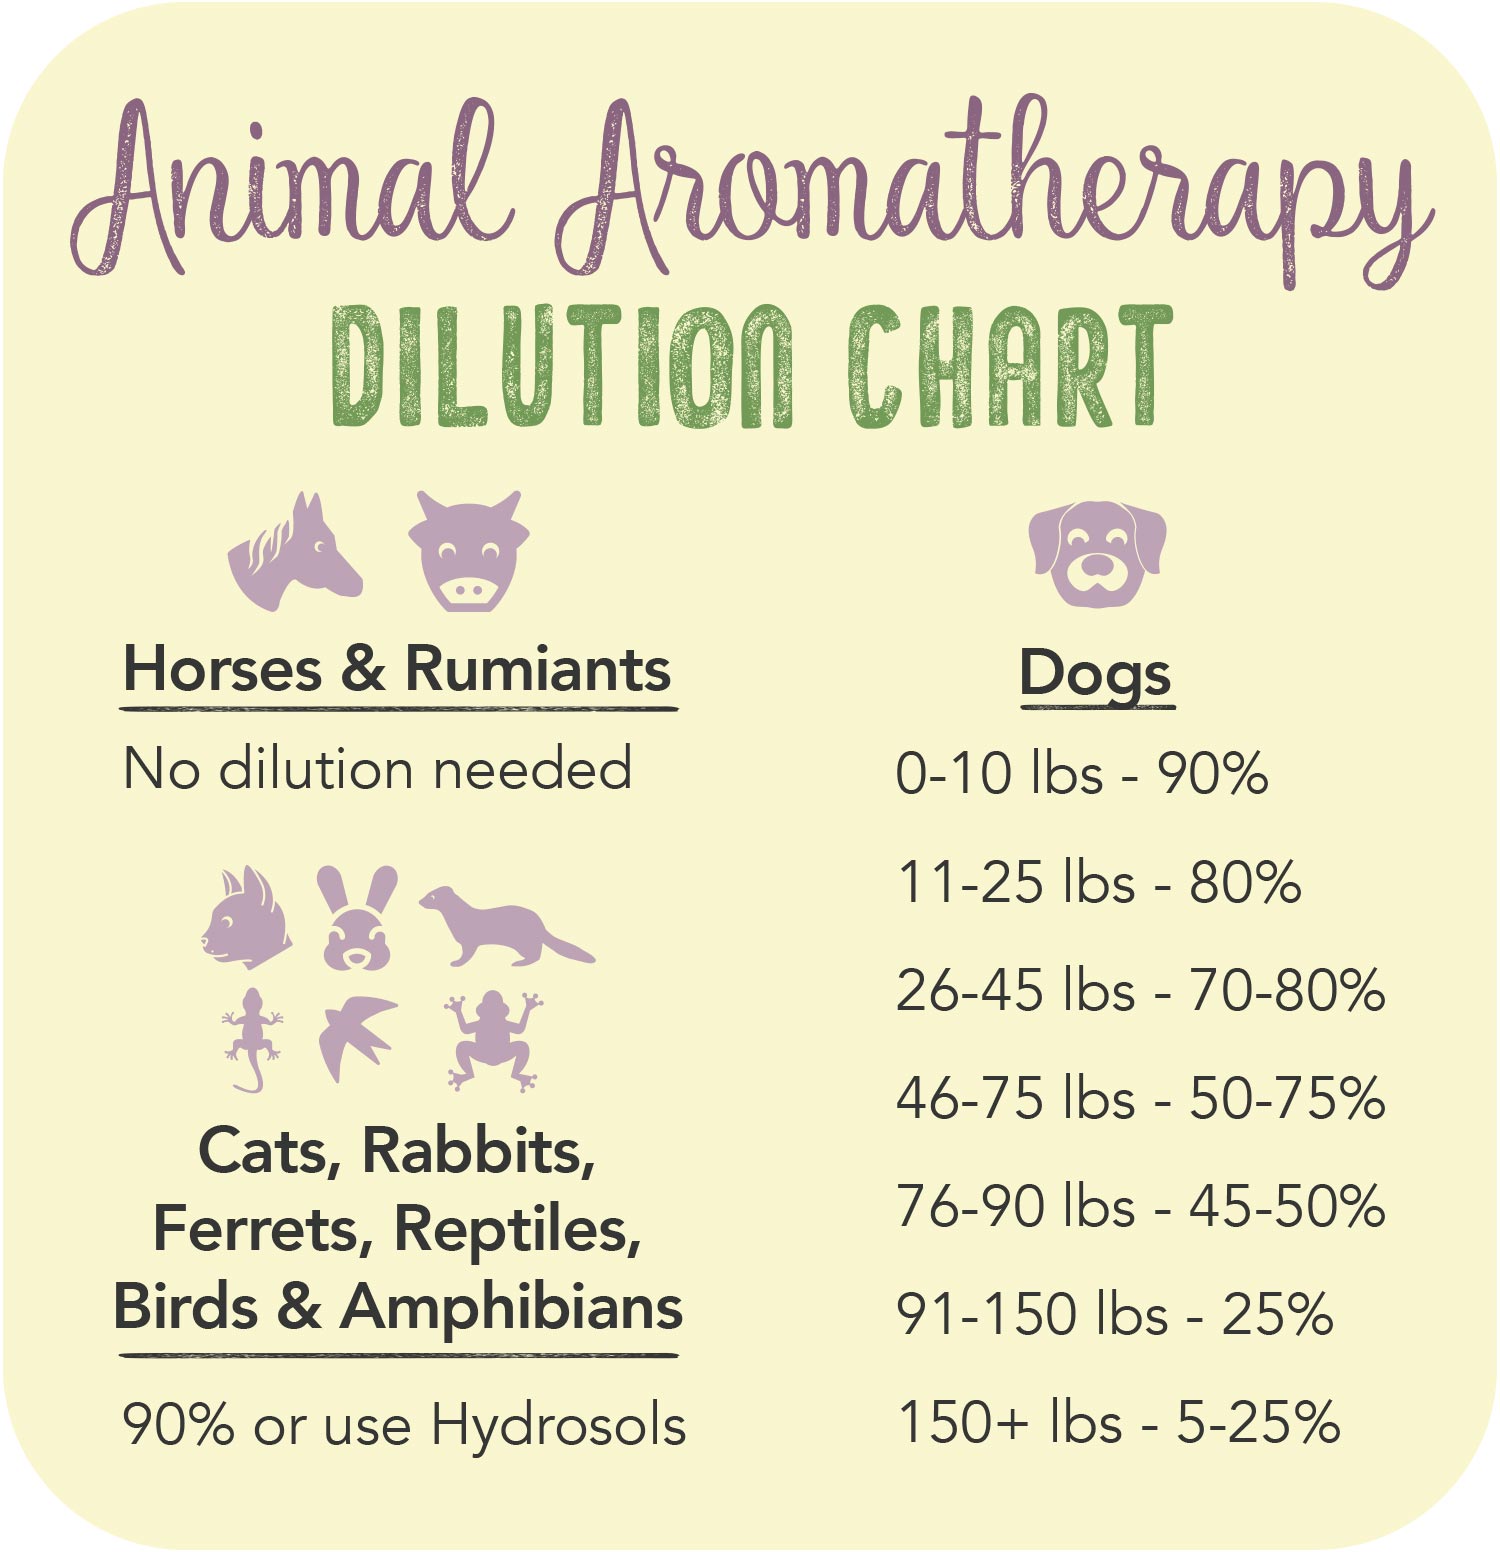 Animal Aromatherapy Dilution Chart showing the dilution percentage for different animal species